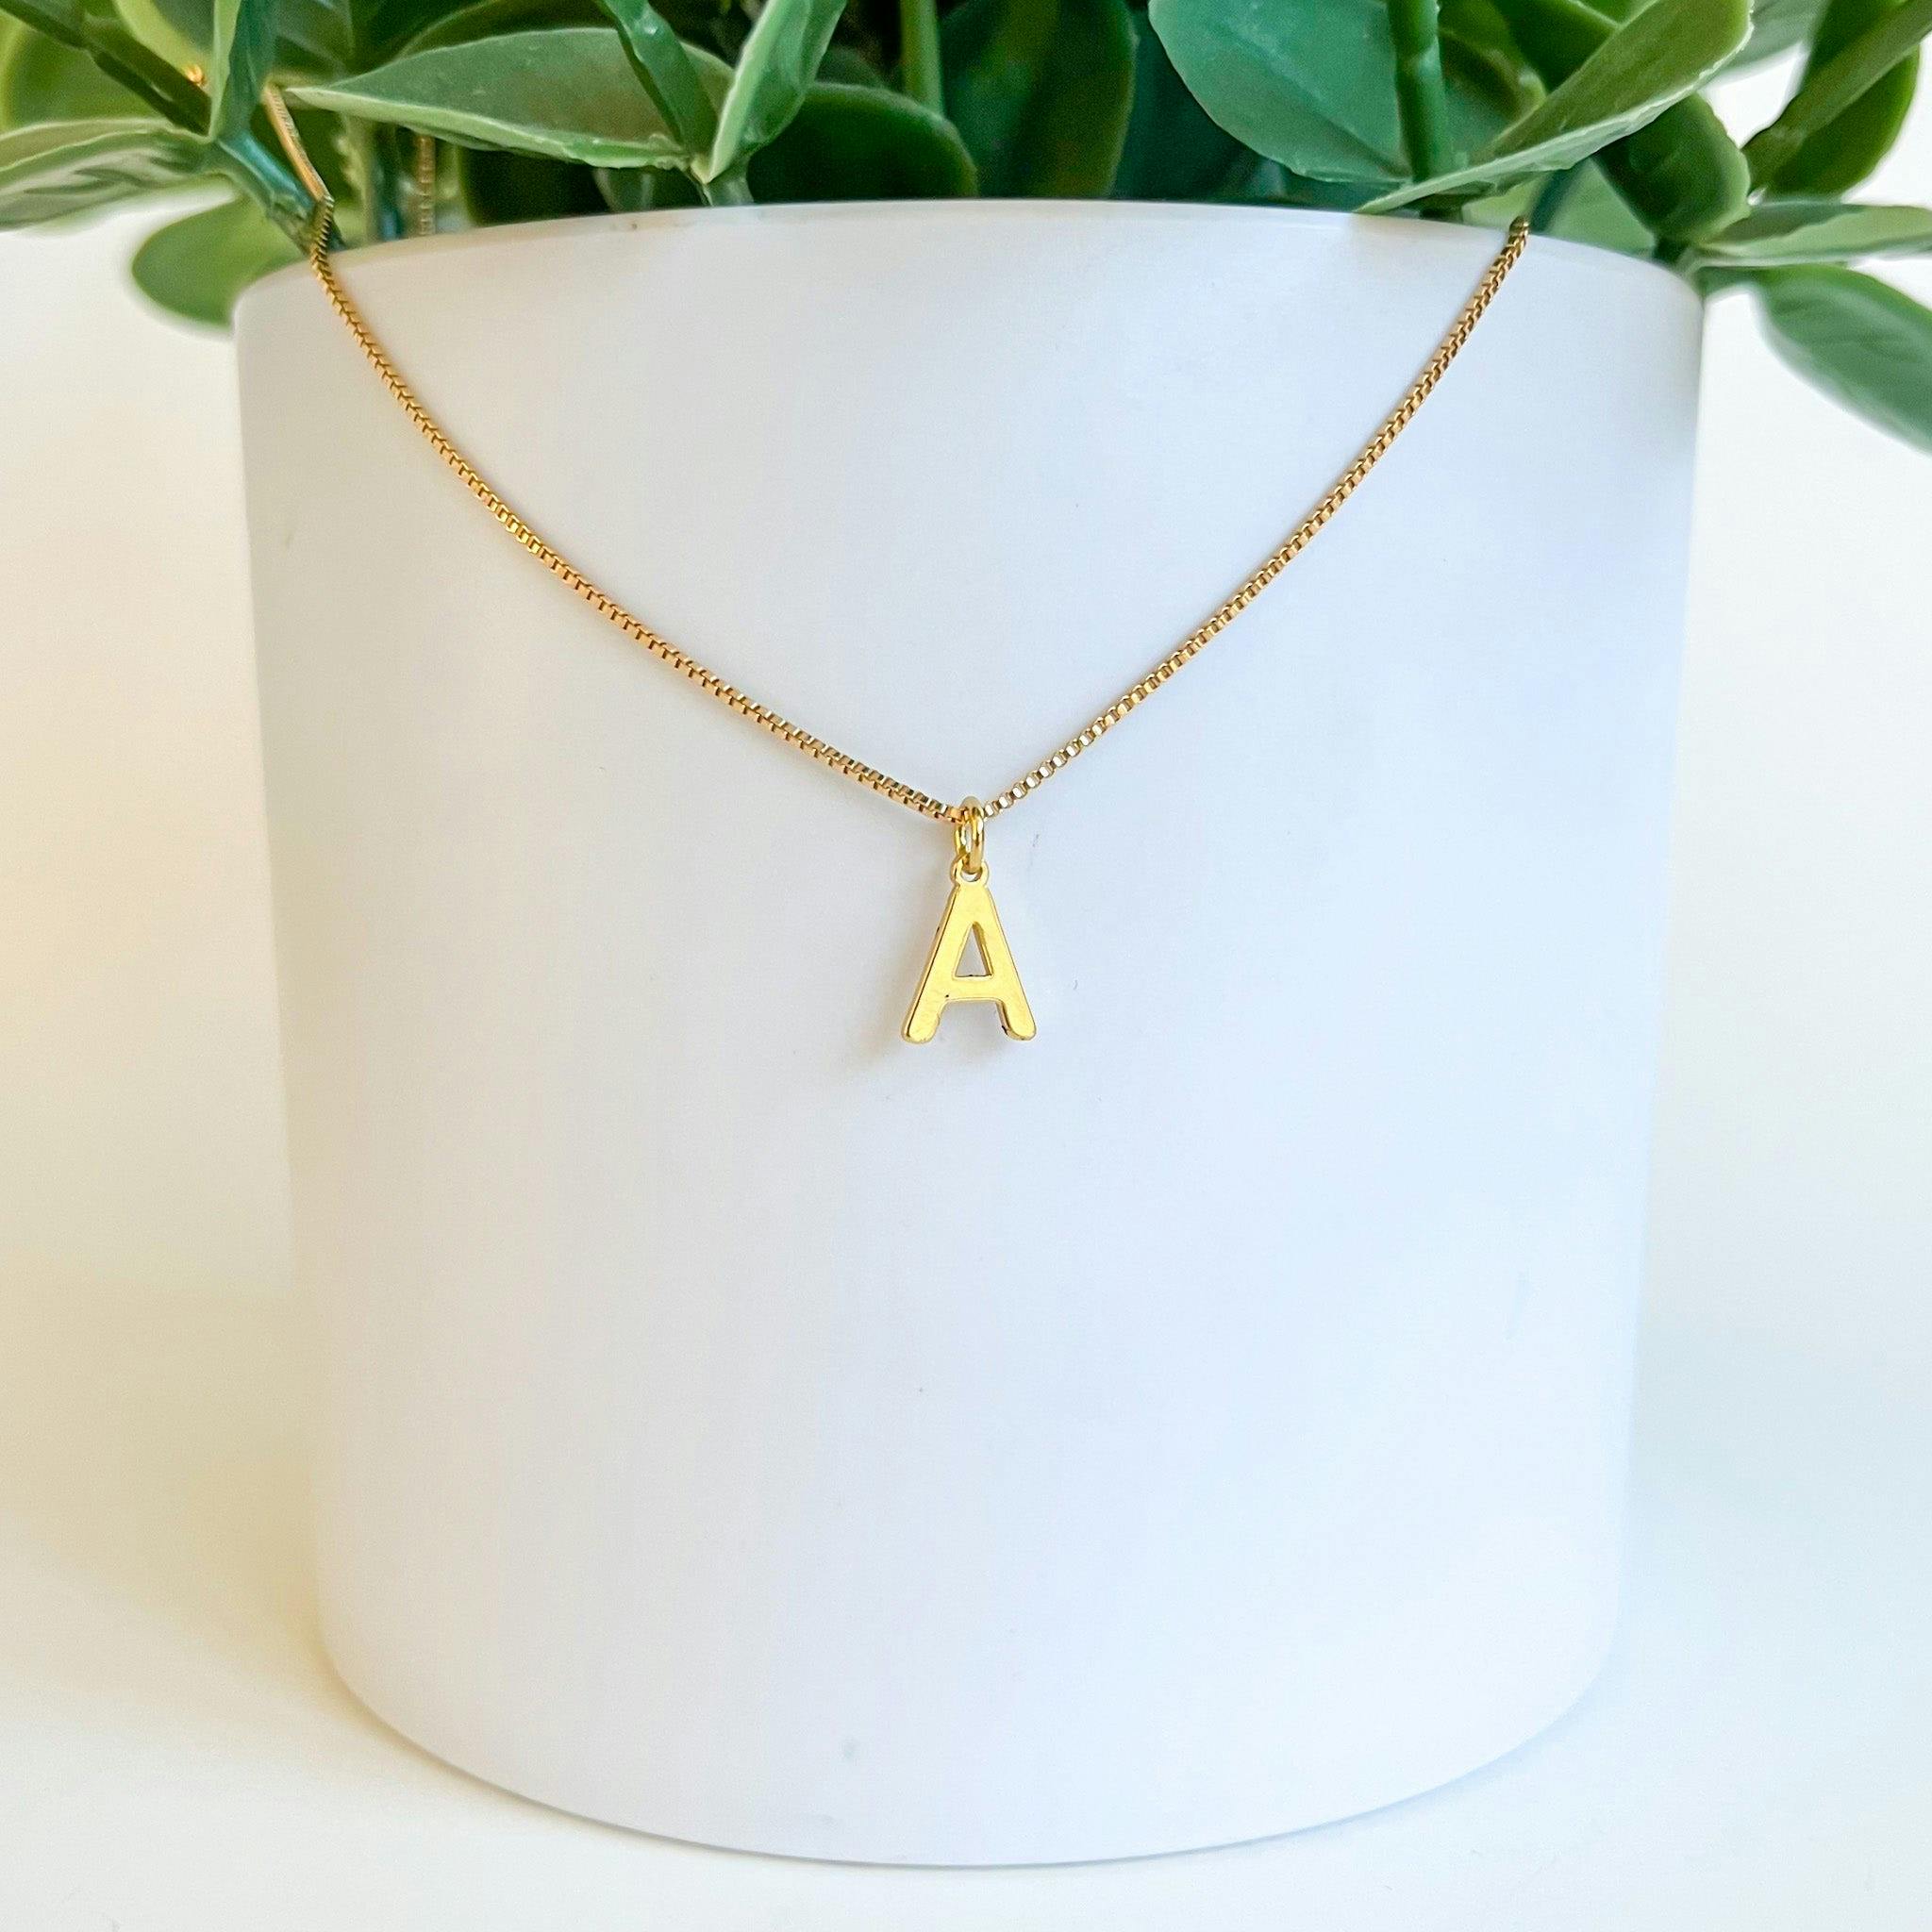 Personalized Initial Letter Necklace - Gold Filled